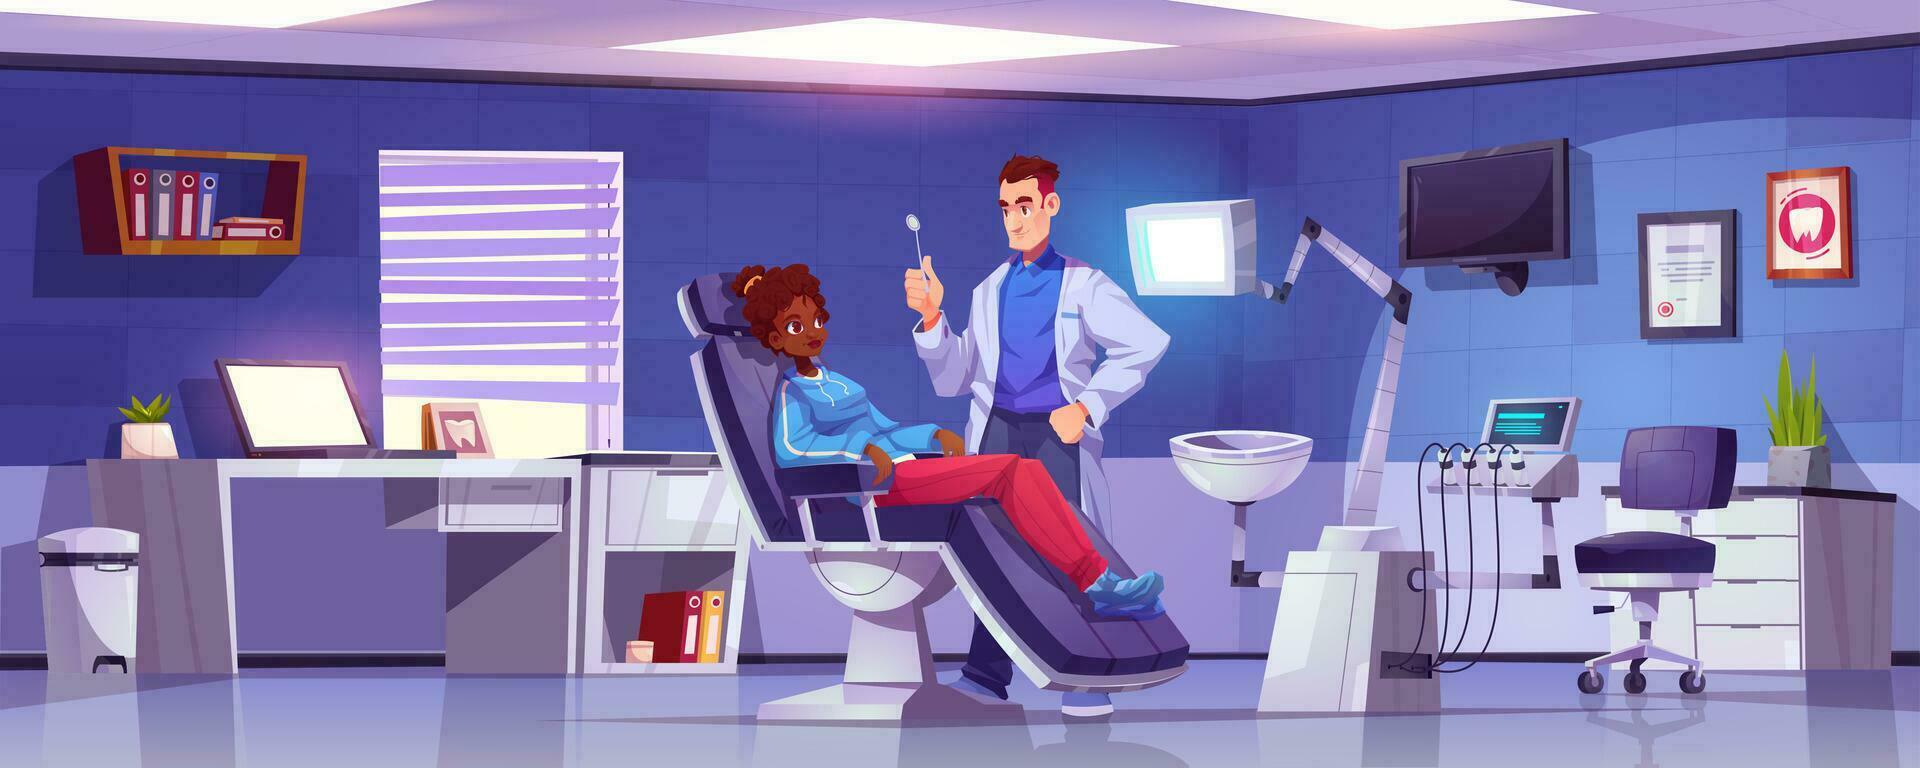 Dentistry office with dentist doctor and patient vector